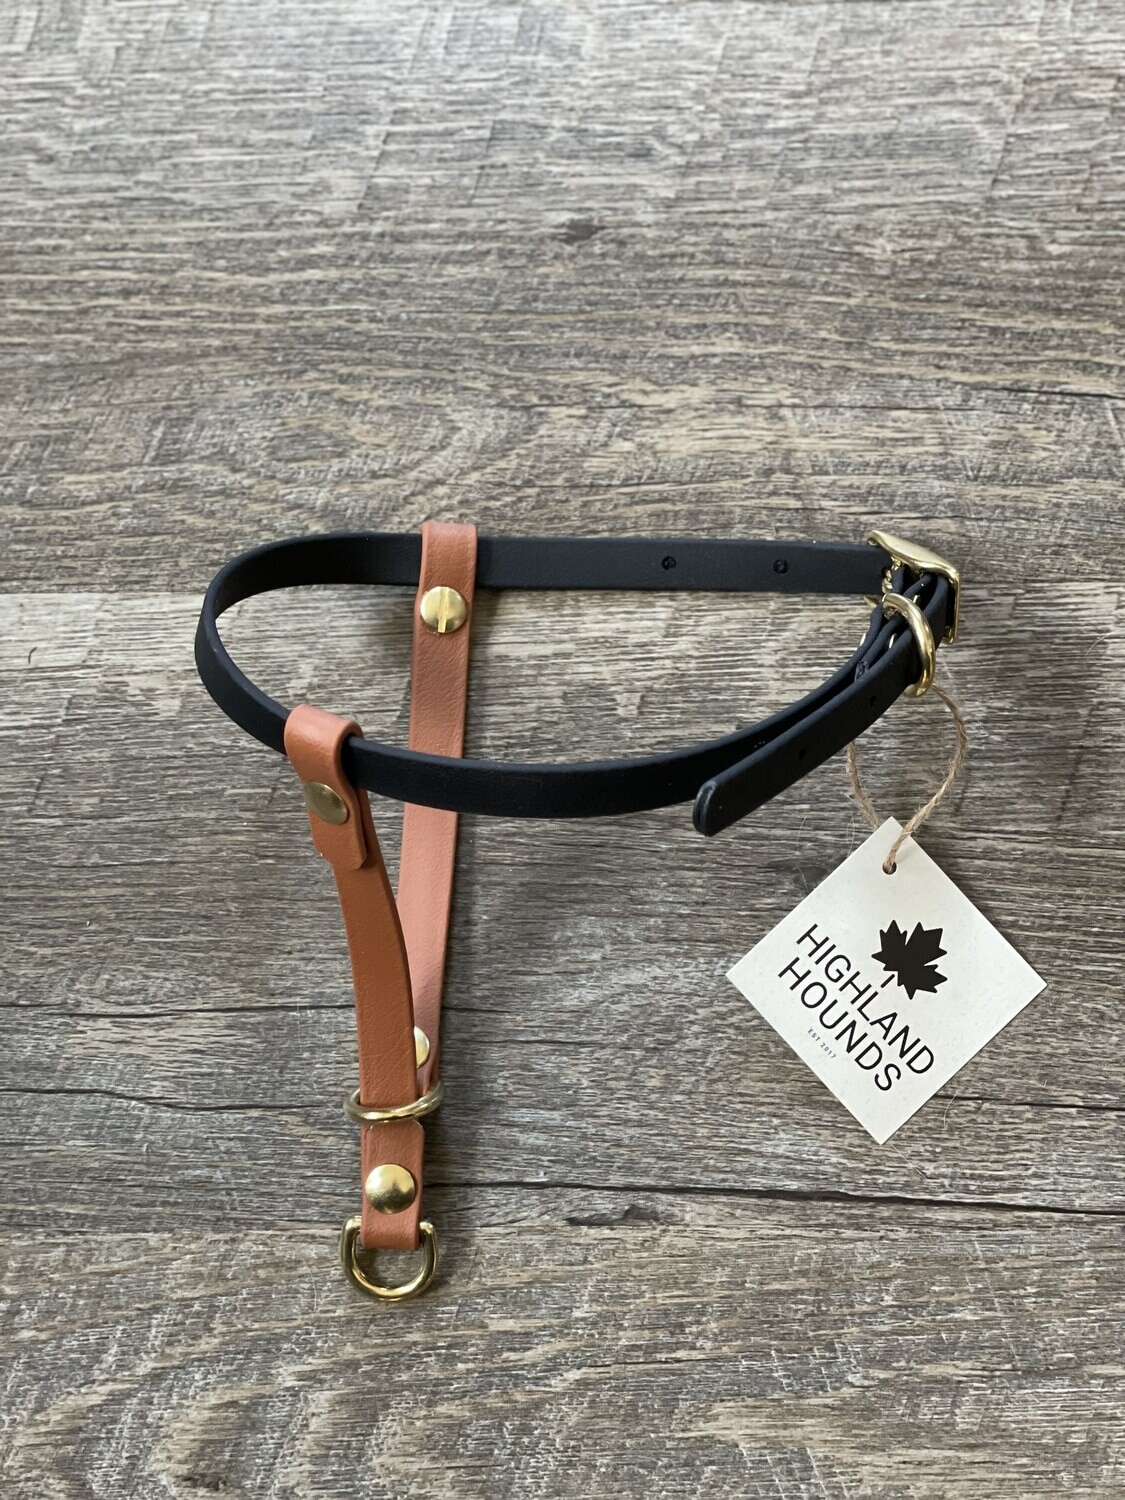 Haul'n Hound Harness (small dogs)